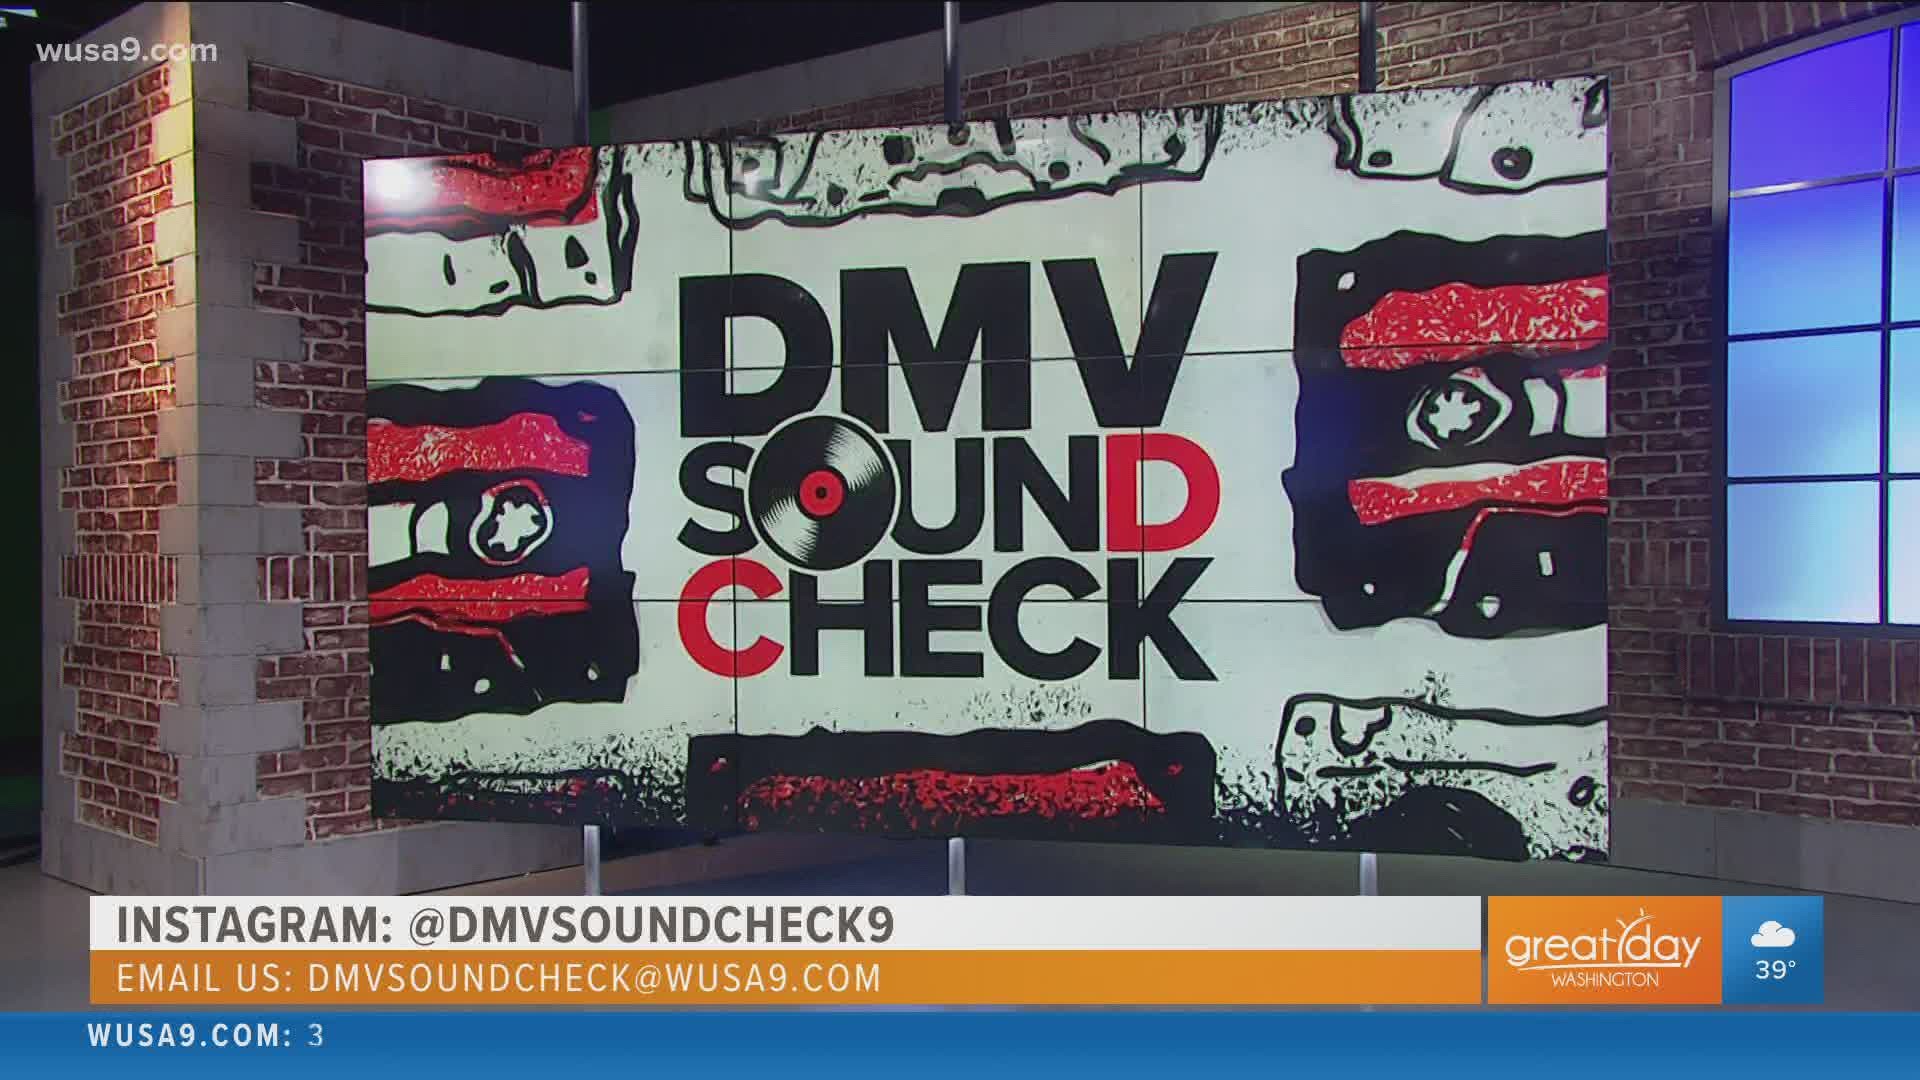 DMV Soundcheck profiles local artist Orlando Mullins. Email DMVSoundcheck@wusa9.com to submit your artist or group to be featured.